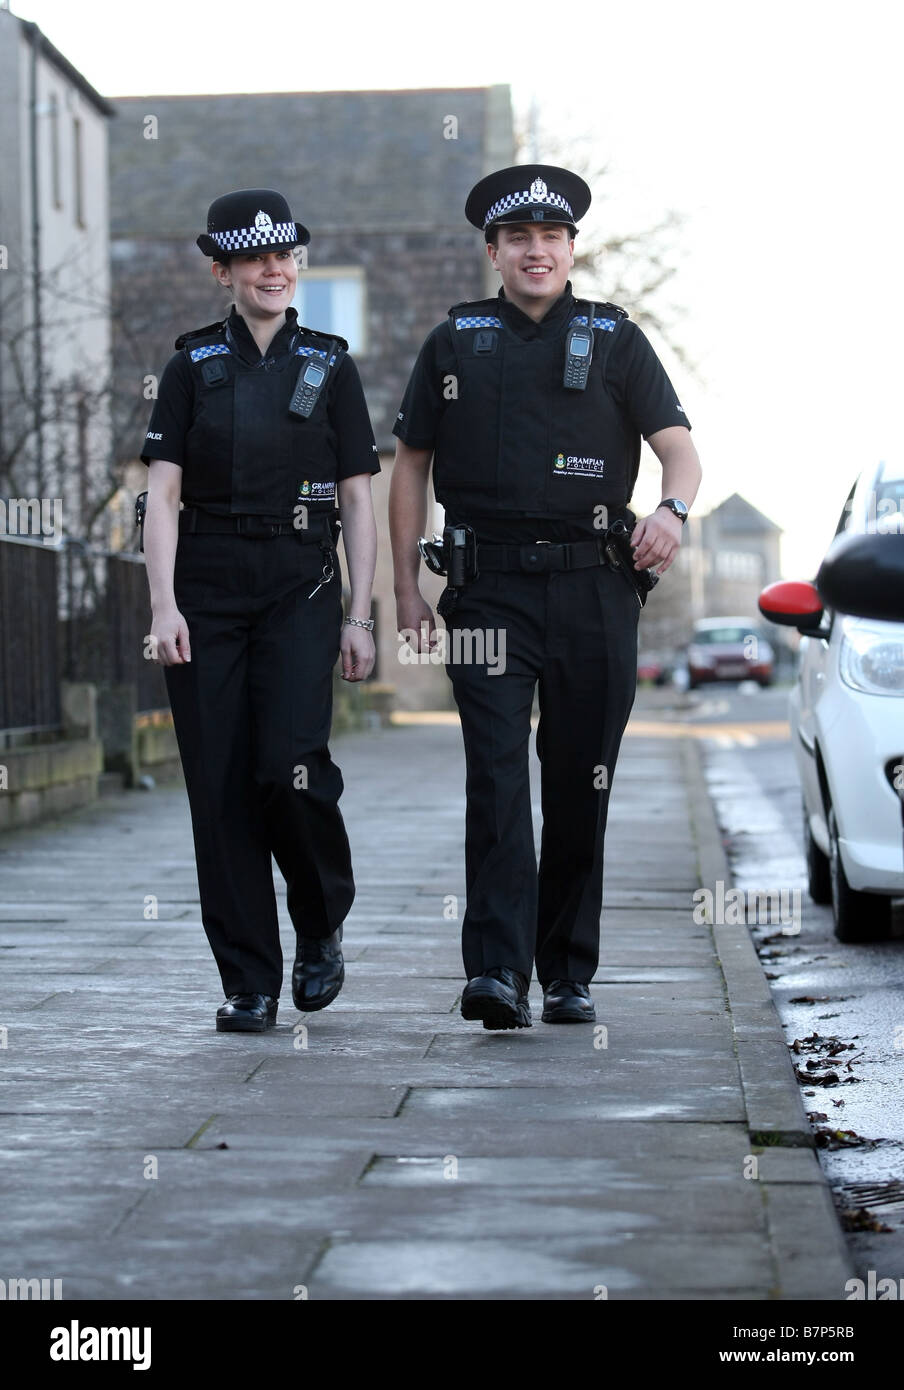 male and female Grampian Police officers from Aberdeen, Scotland, UK, on patrol in the city Stock Photo